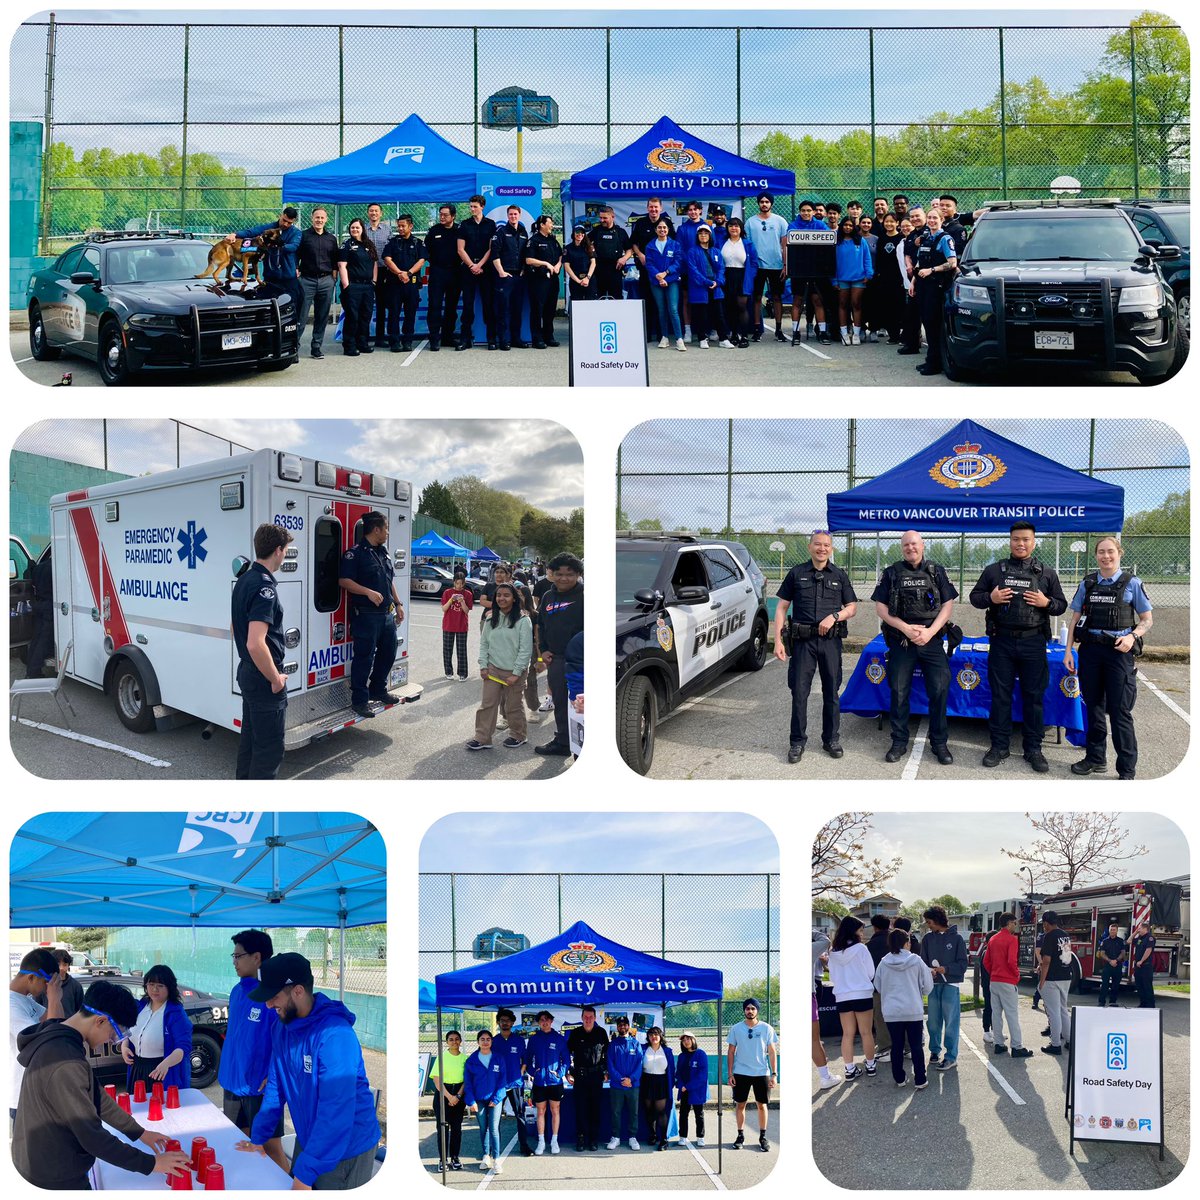 Welcome to Road Safety Day @DTSecondary we're here with @VancouverPD @VanFireRescue @BC_EHS @TransitPolice @svcpc @VPDTrafficUnit @VPDRecruiting @VPDCadets speaking with @VSB39 students on how to be safe on the roads @CityofVancouver. #DriveSafeBC @icbc